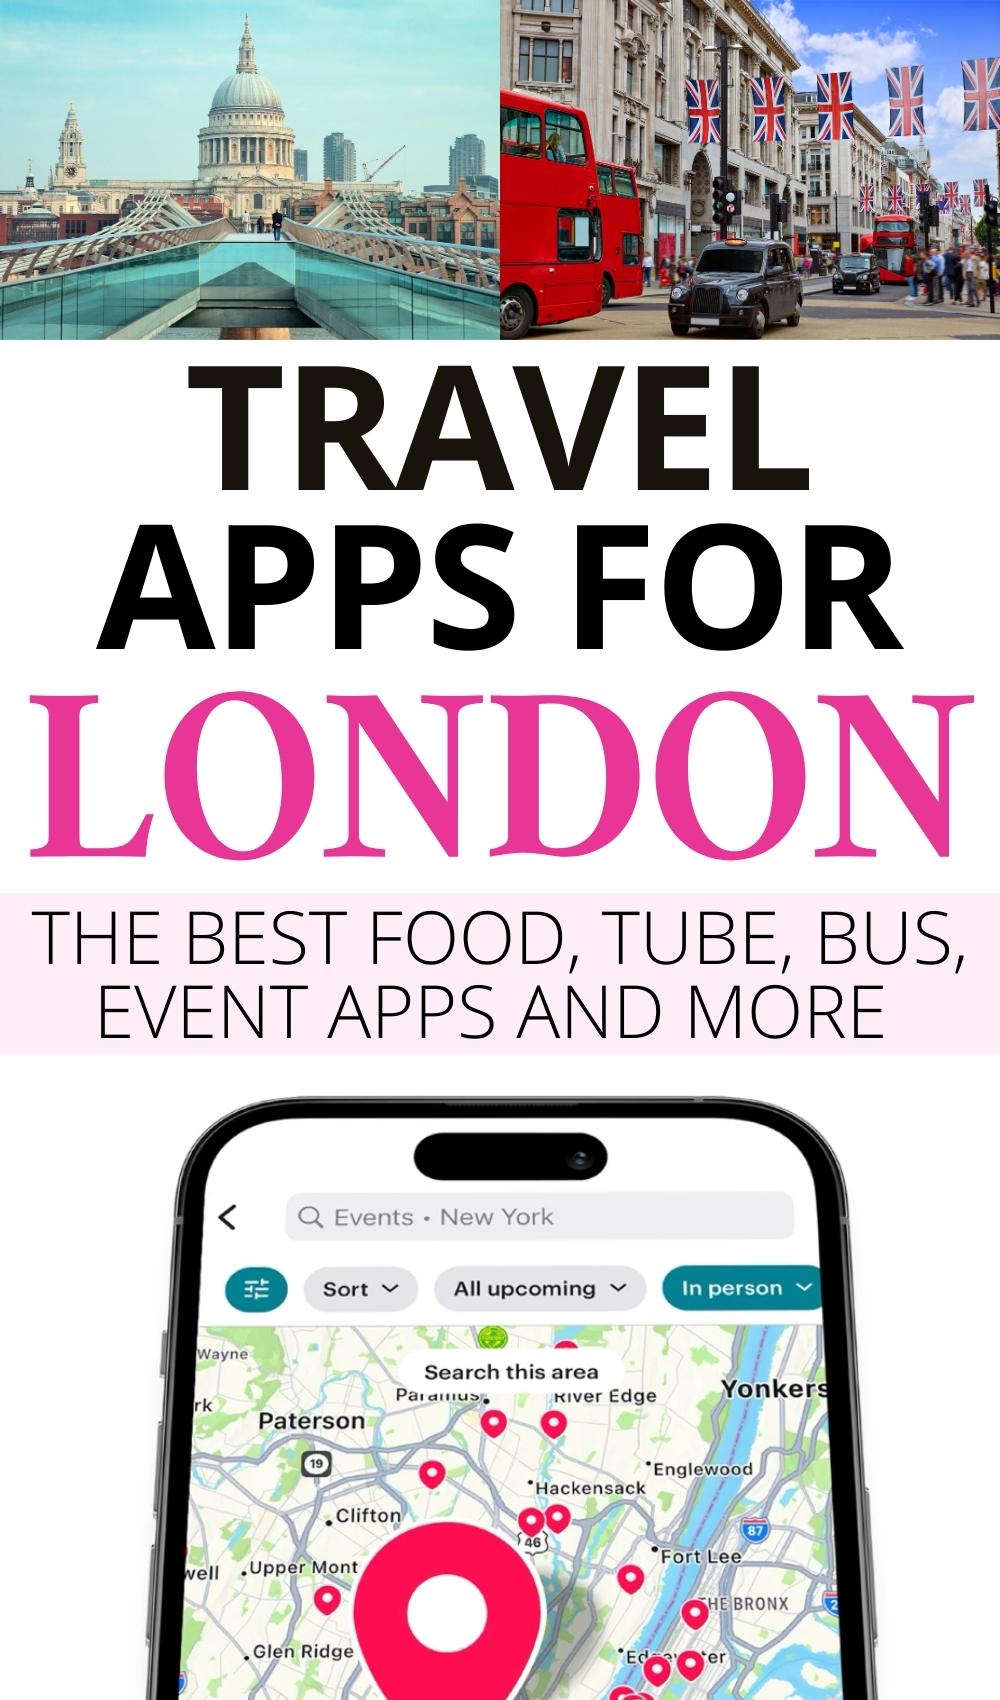 best must have apps in london - citymapper london app - best app for london tube - best london bus app - best apps to use in london - best london travel apps - best dining out apps in london - best cheap eats in london - london travel guide - best things to do in london - how to live in london on a budget - eat in london on a budget - traveling to london for the first time - things i wish i knew before going to london - useful apps for london trip